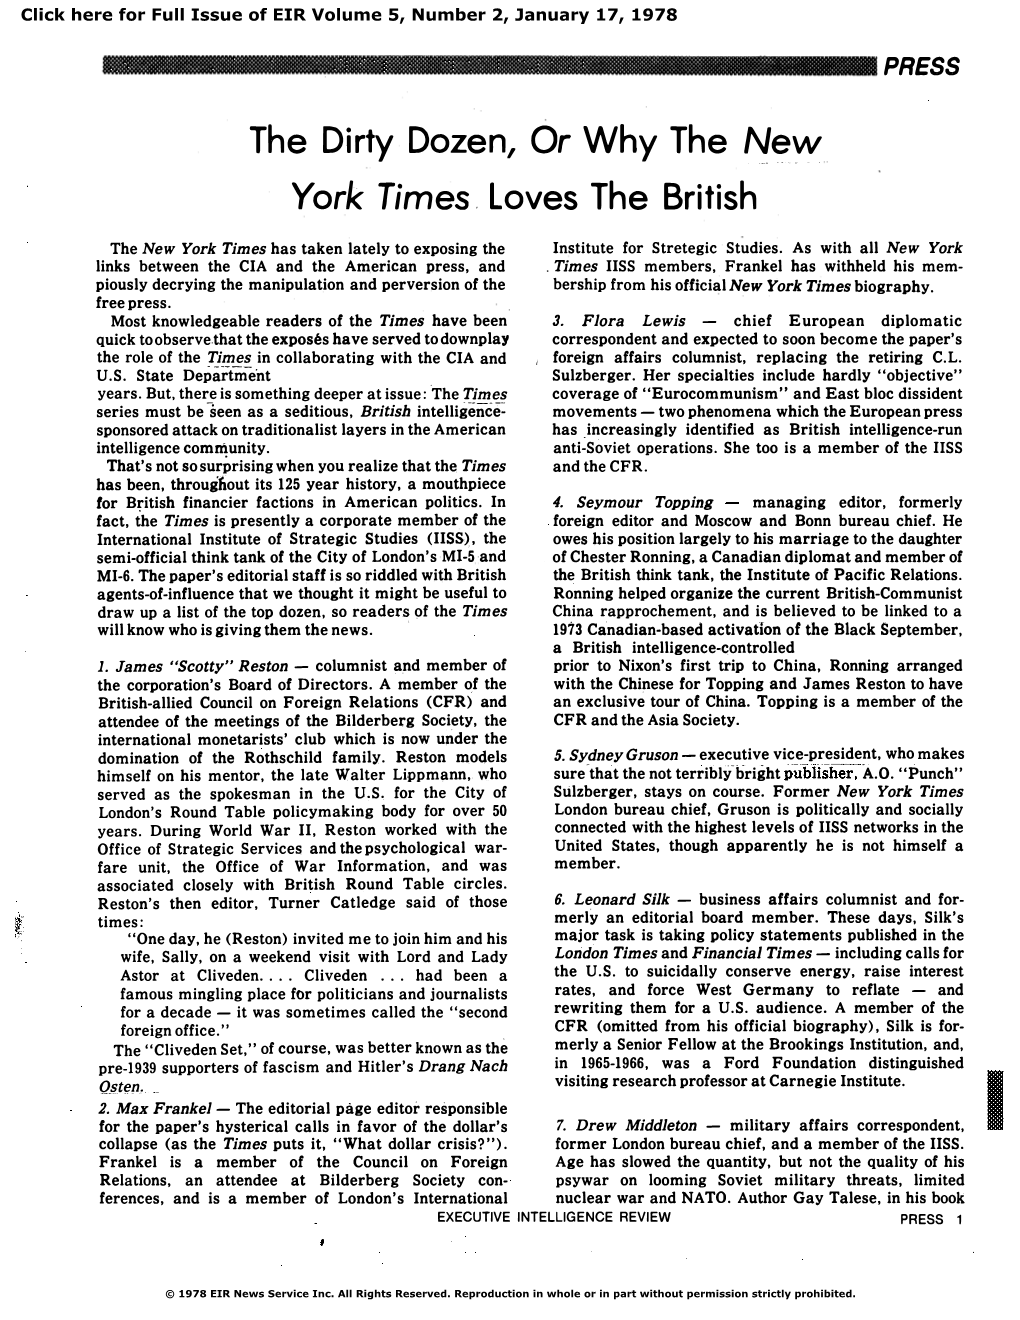 The Dirty Dozen, Or Why the {New York Times} Loves the British